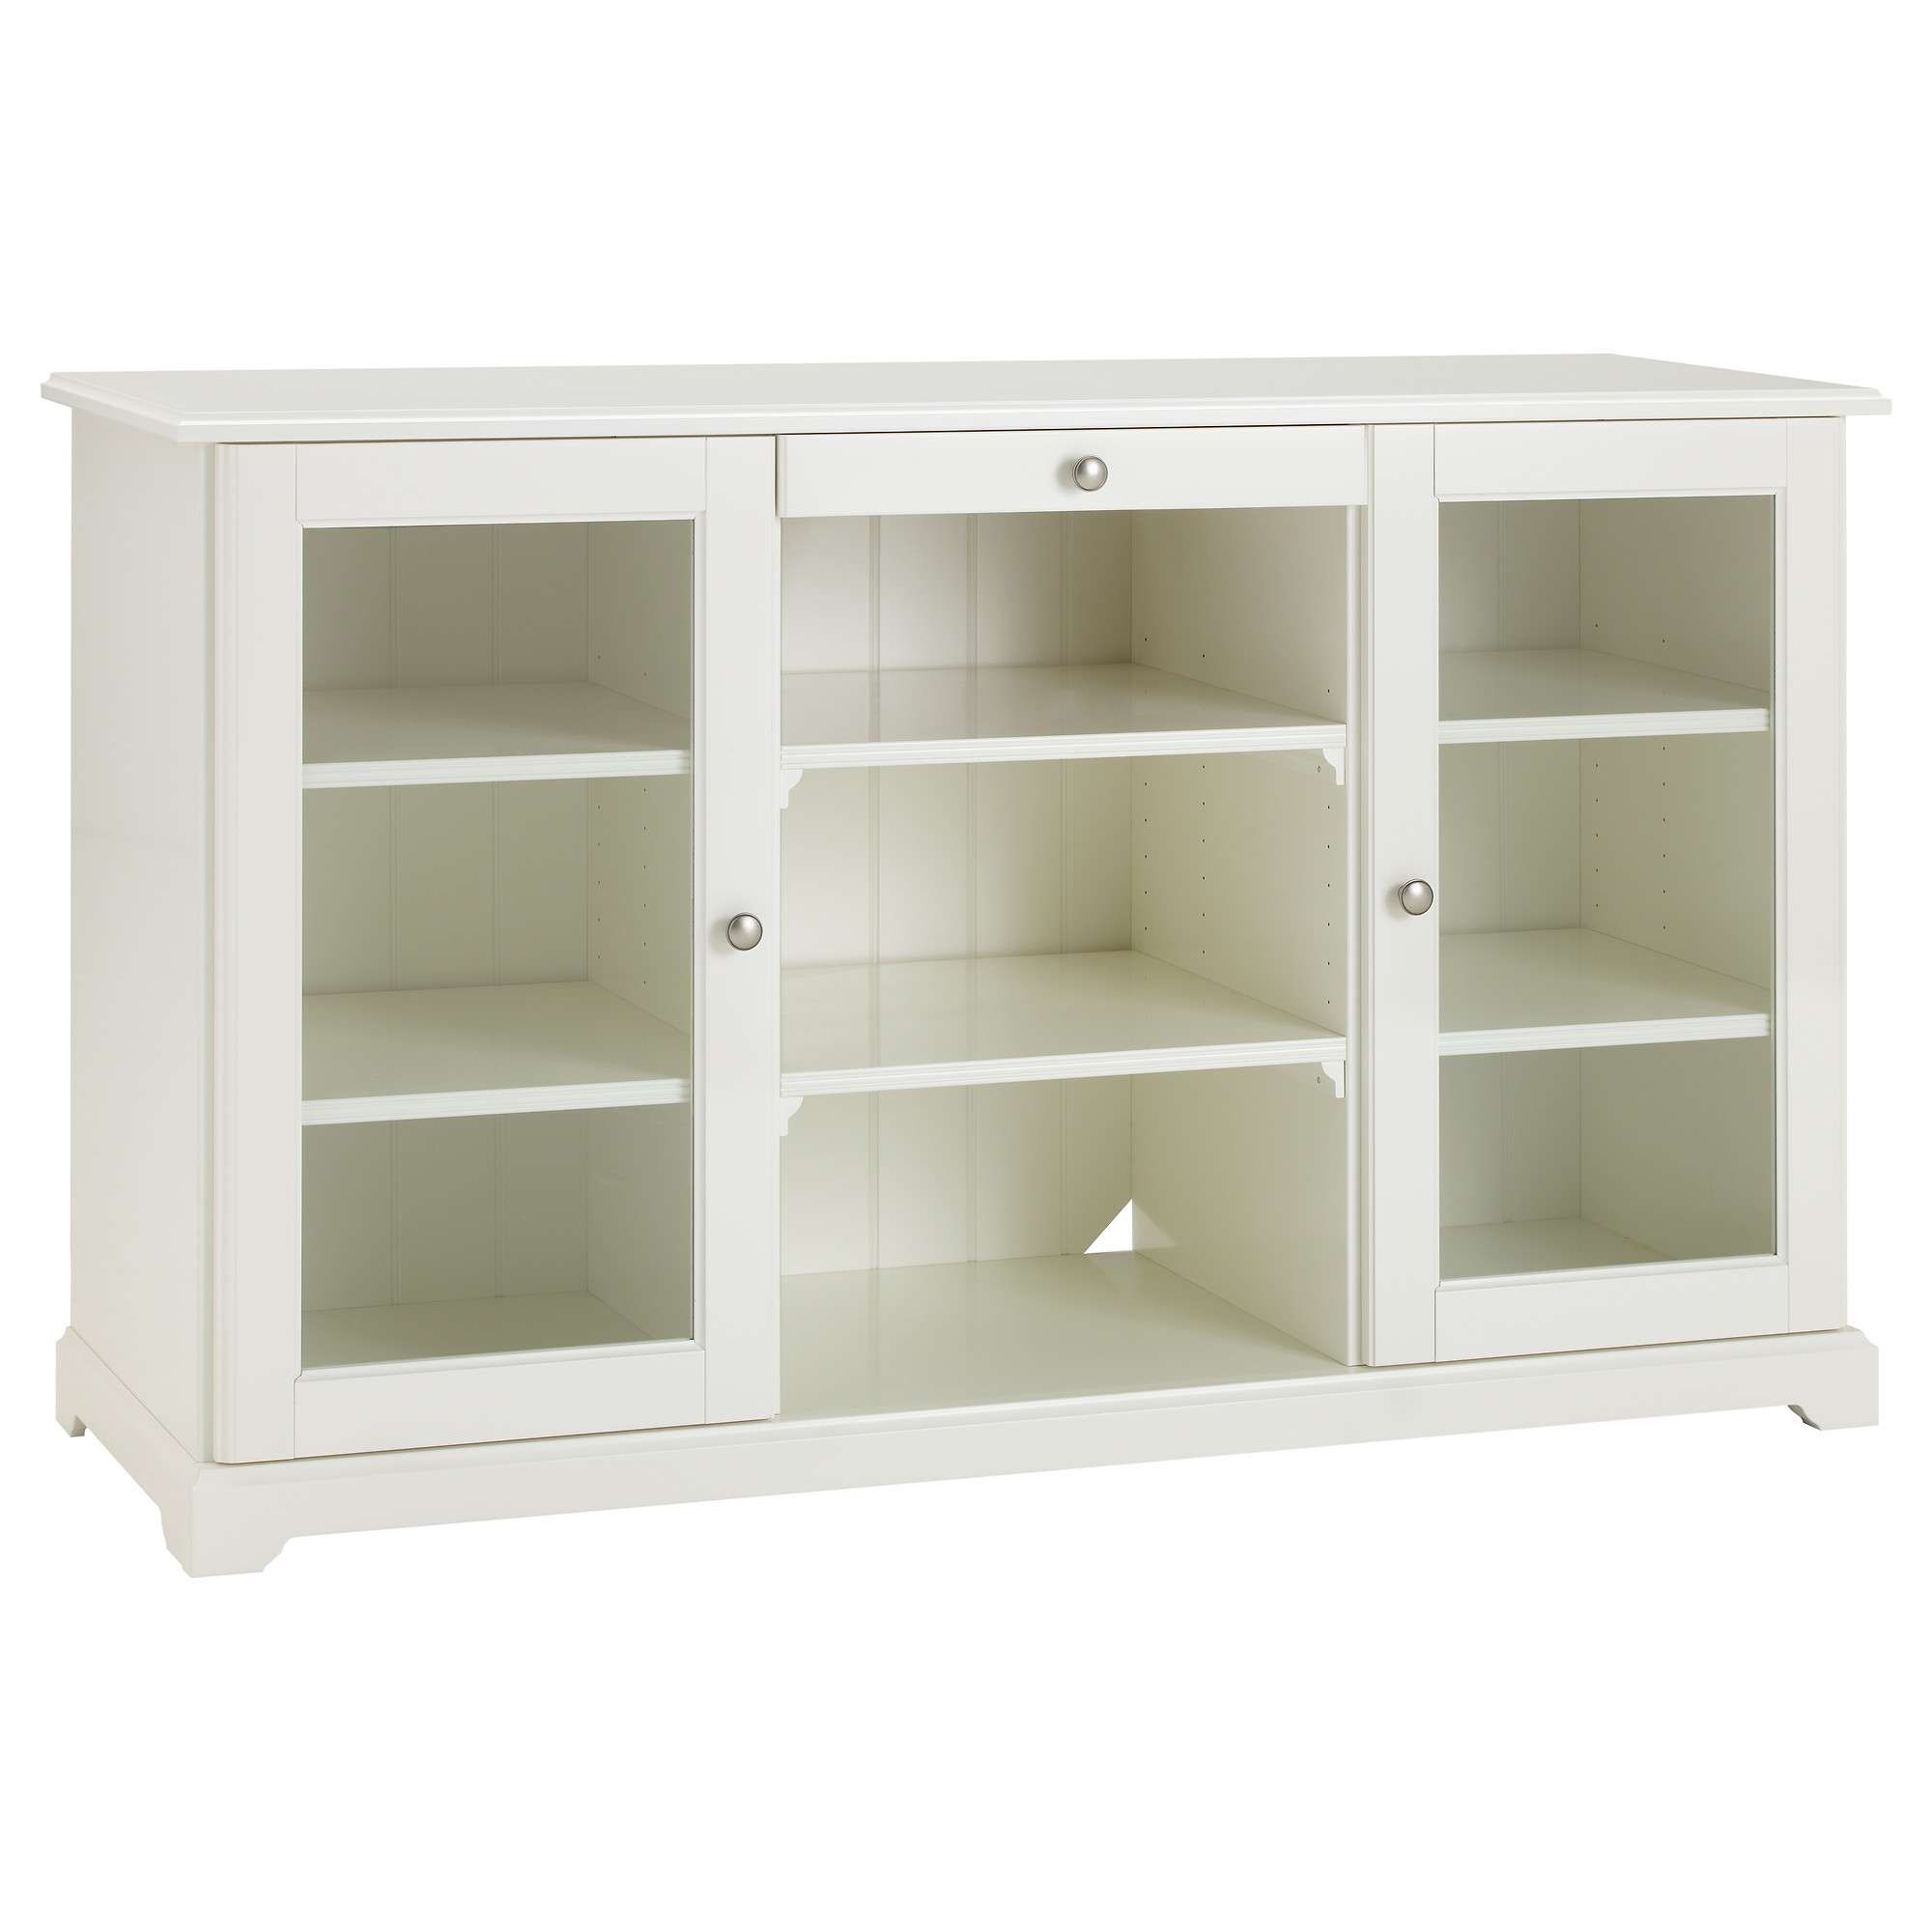 Liatorp Sideboard – White – Ikea In White Sideboards (View 3 of 20)